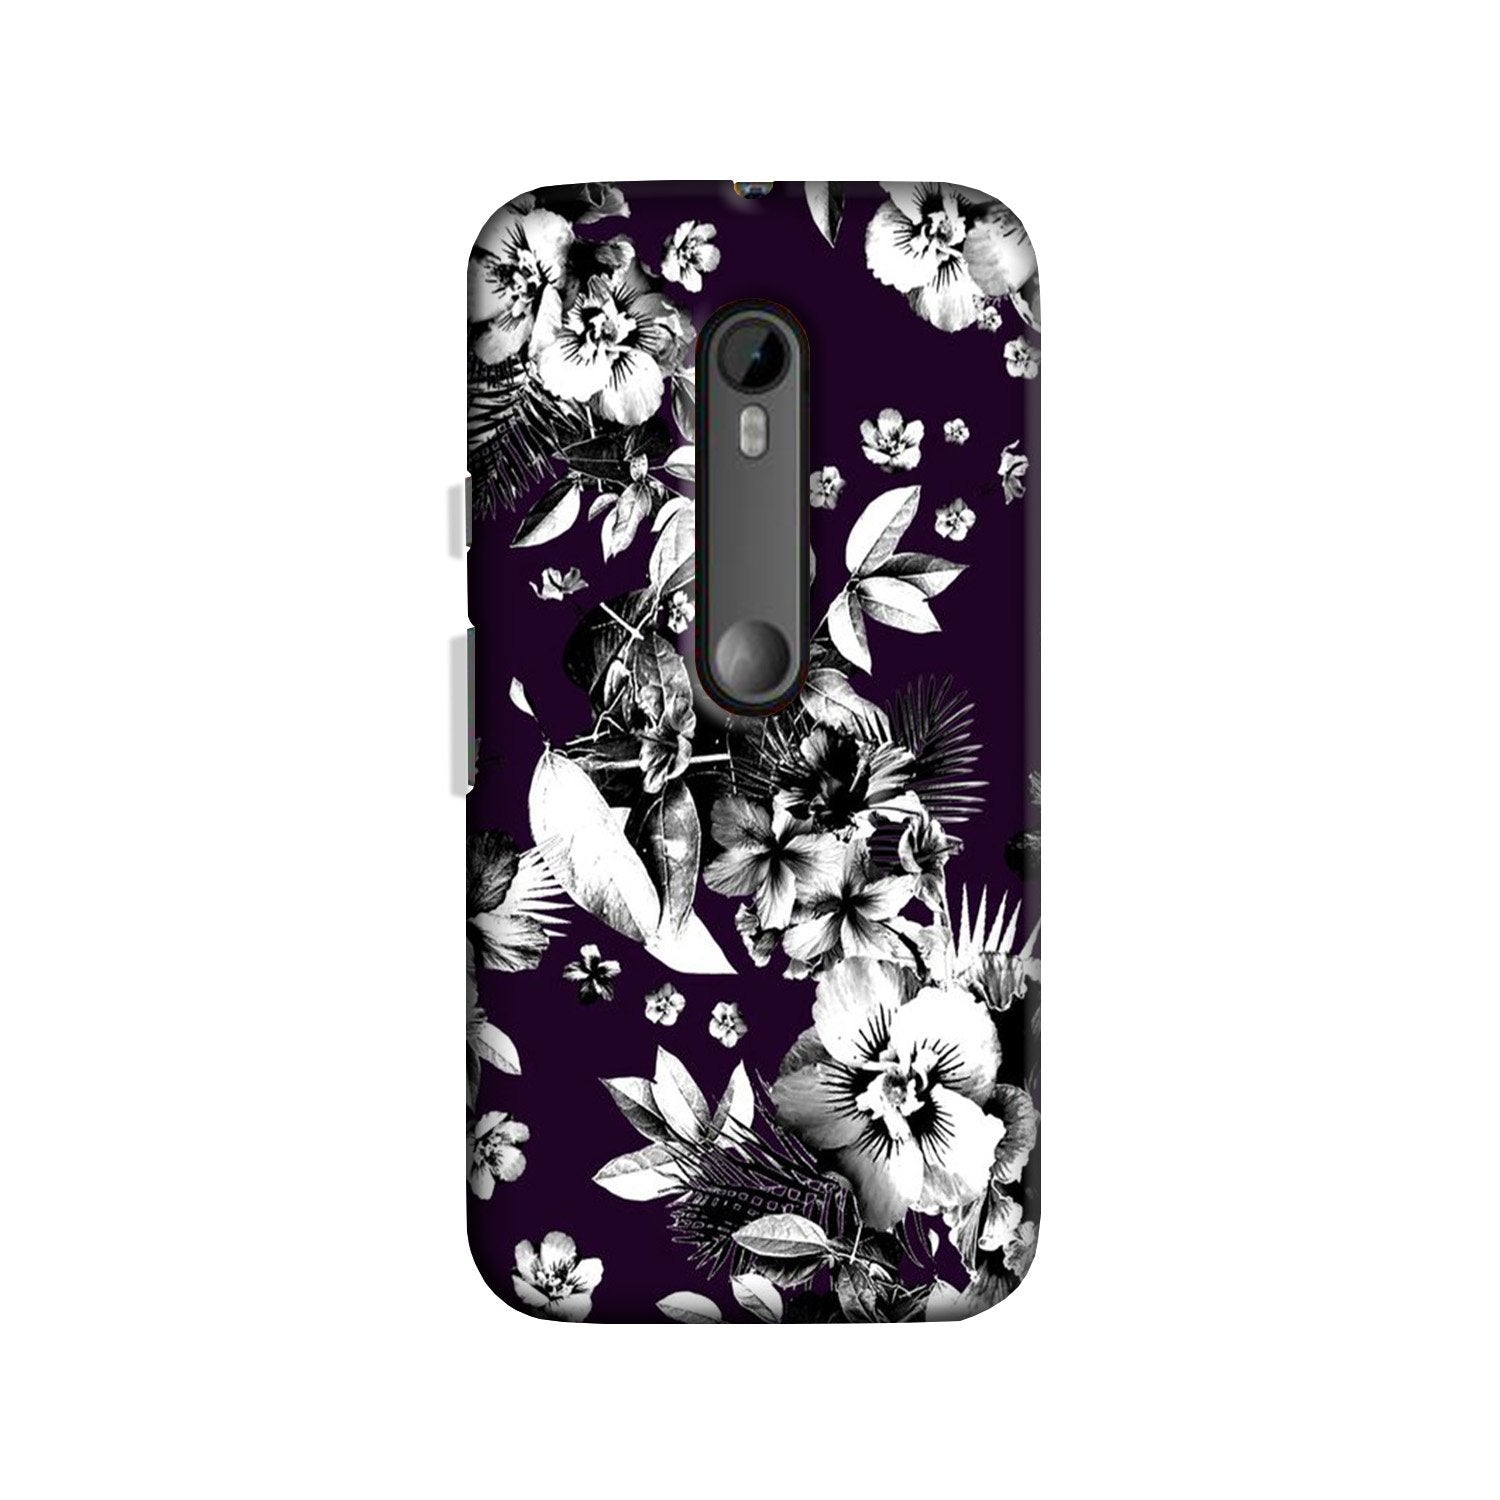 white flowers Case for Moto X Play